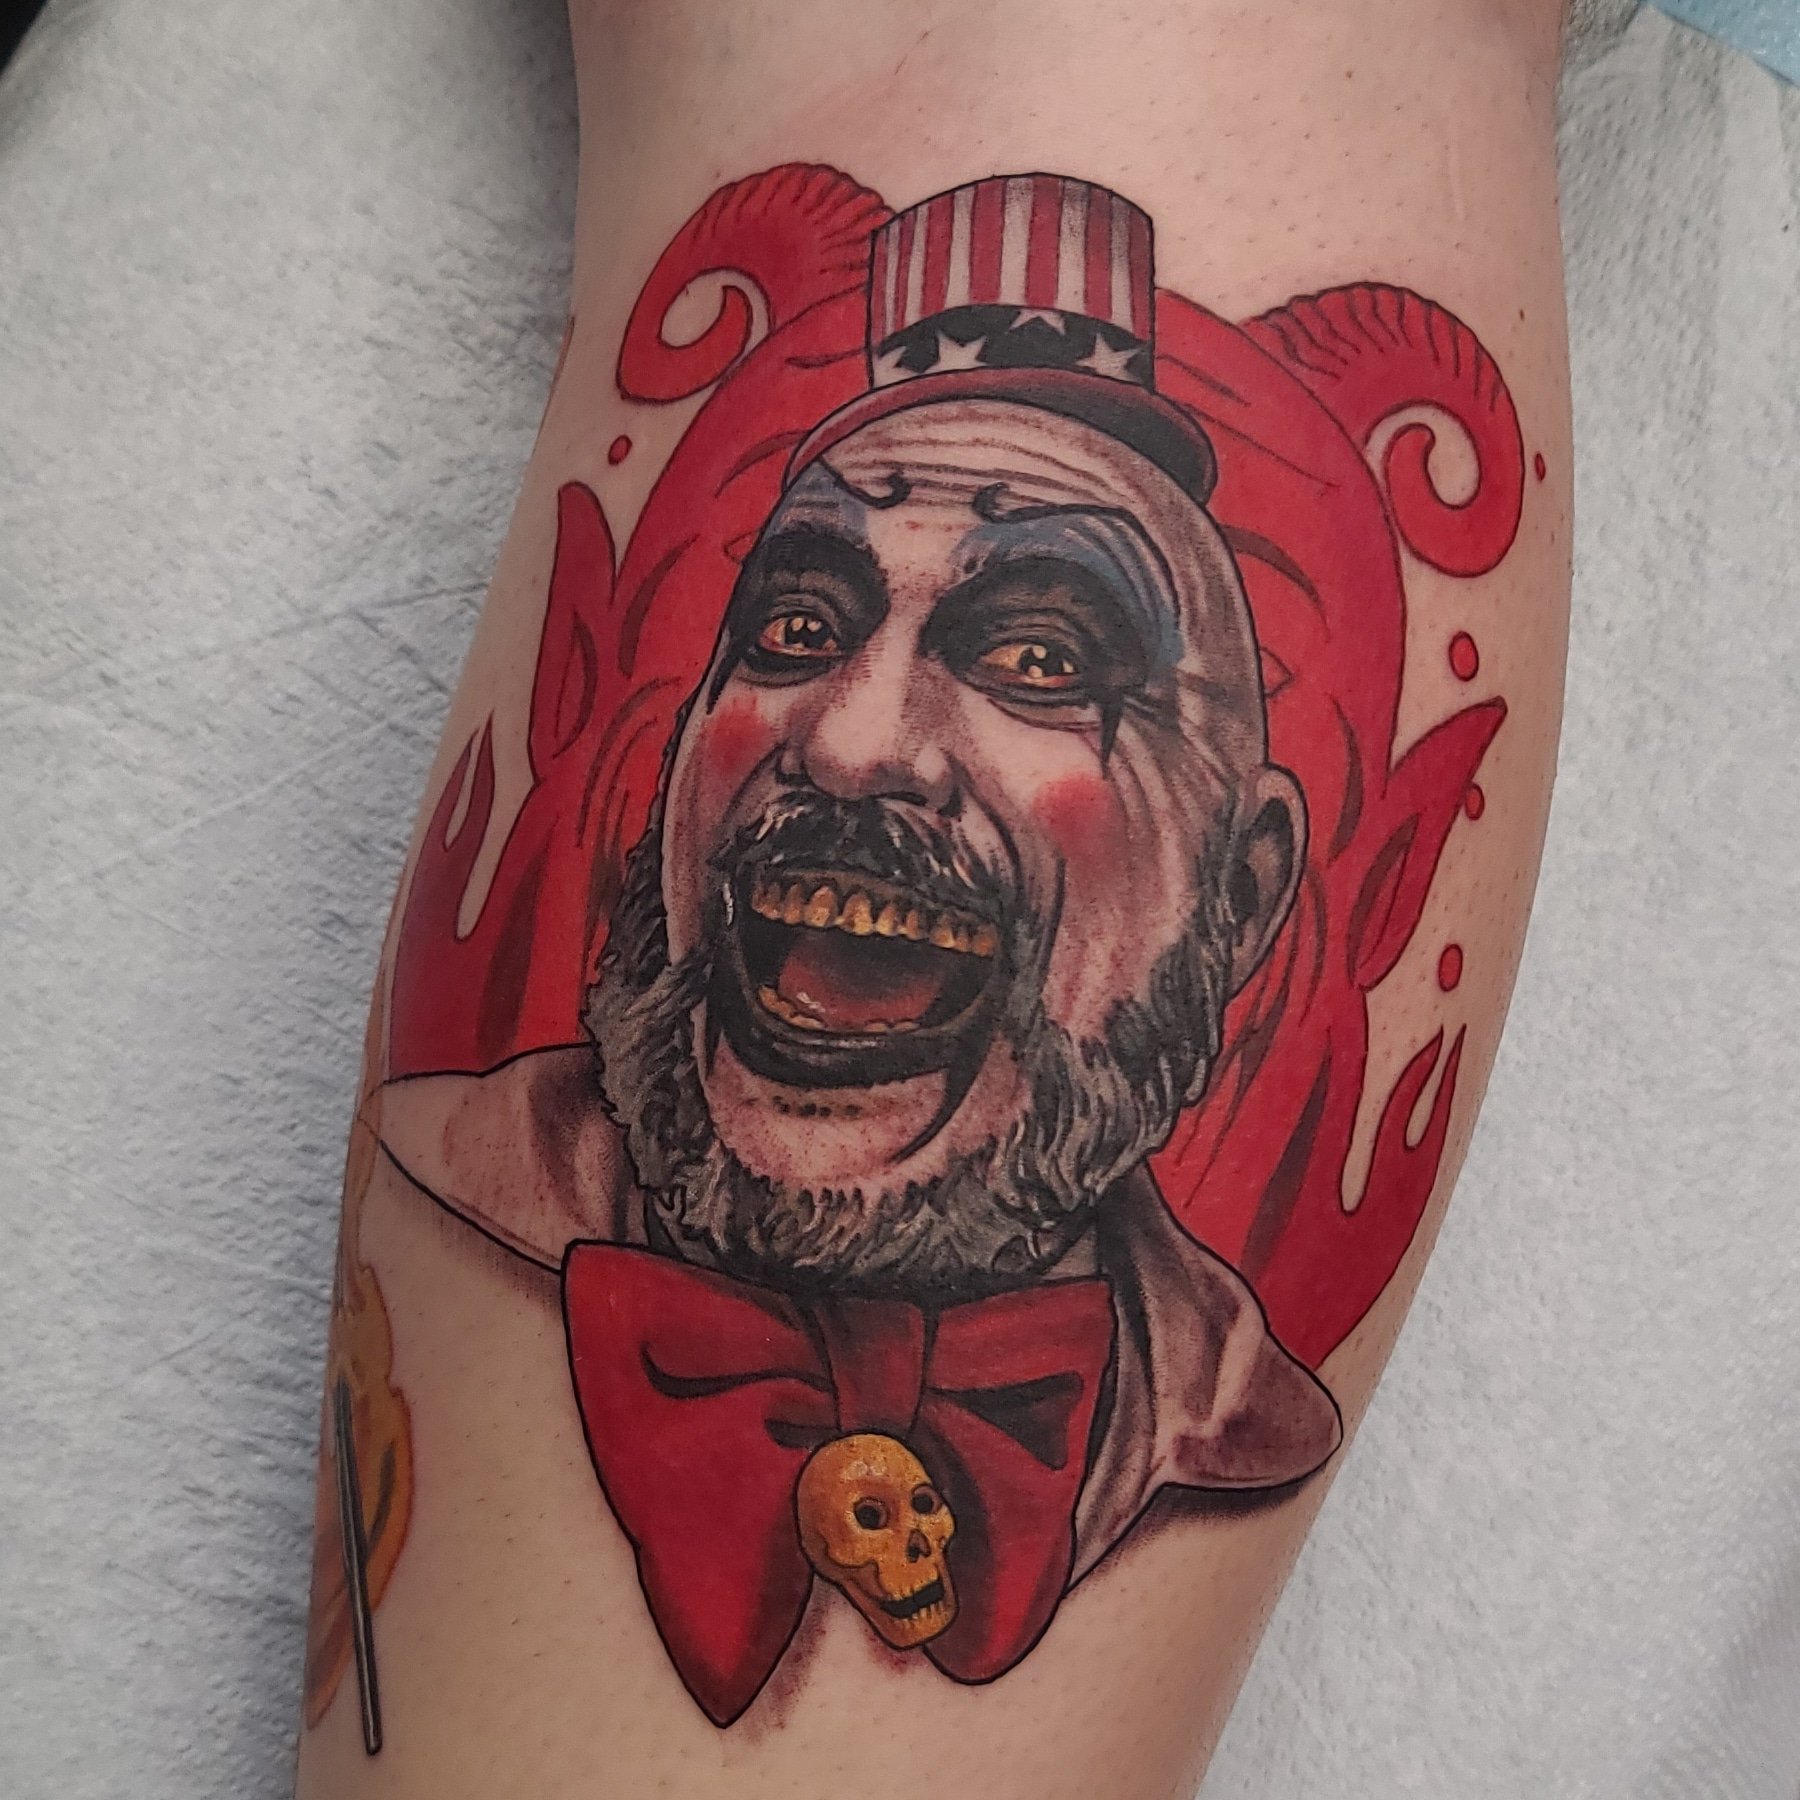 Just in time for Halloween tribute to the horror icon Captain SpauldingSid  Haig  rtraditionaltattoos